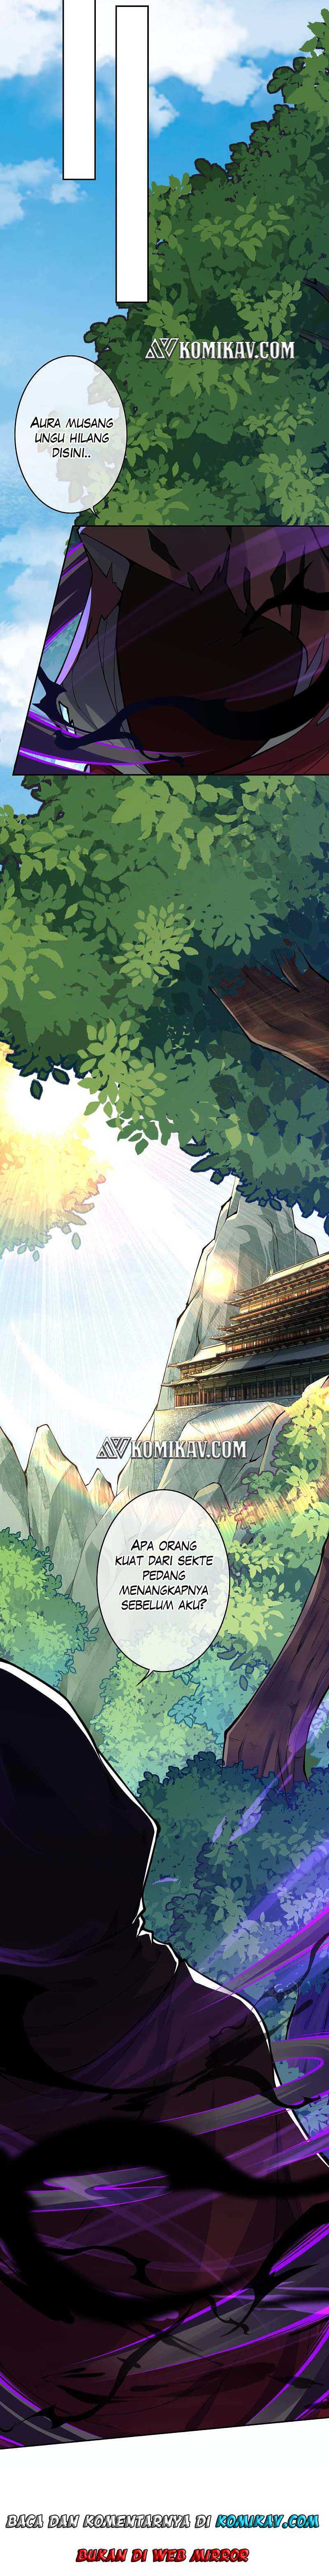 Invincible Sword Domain Chapter 30